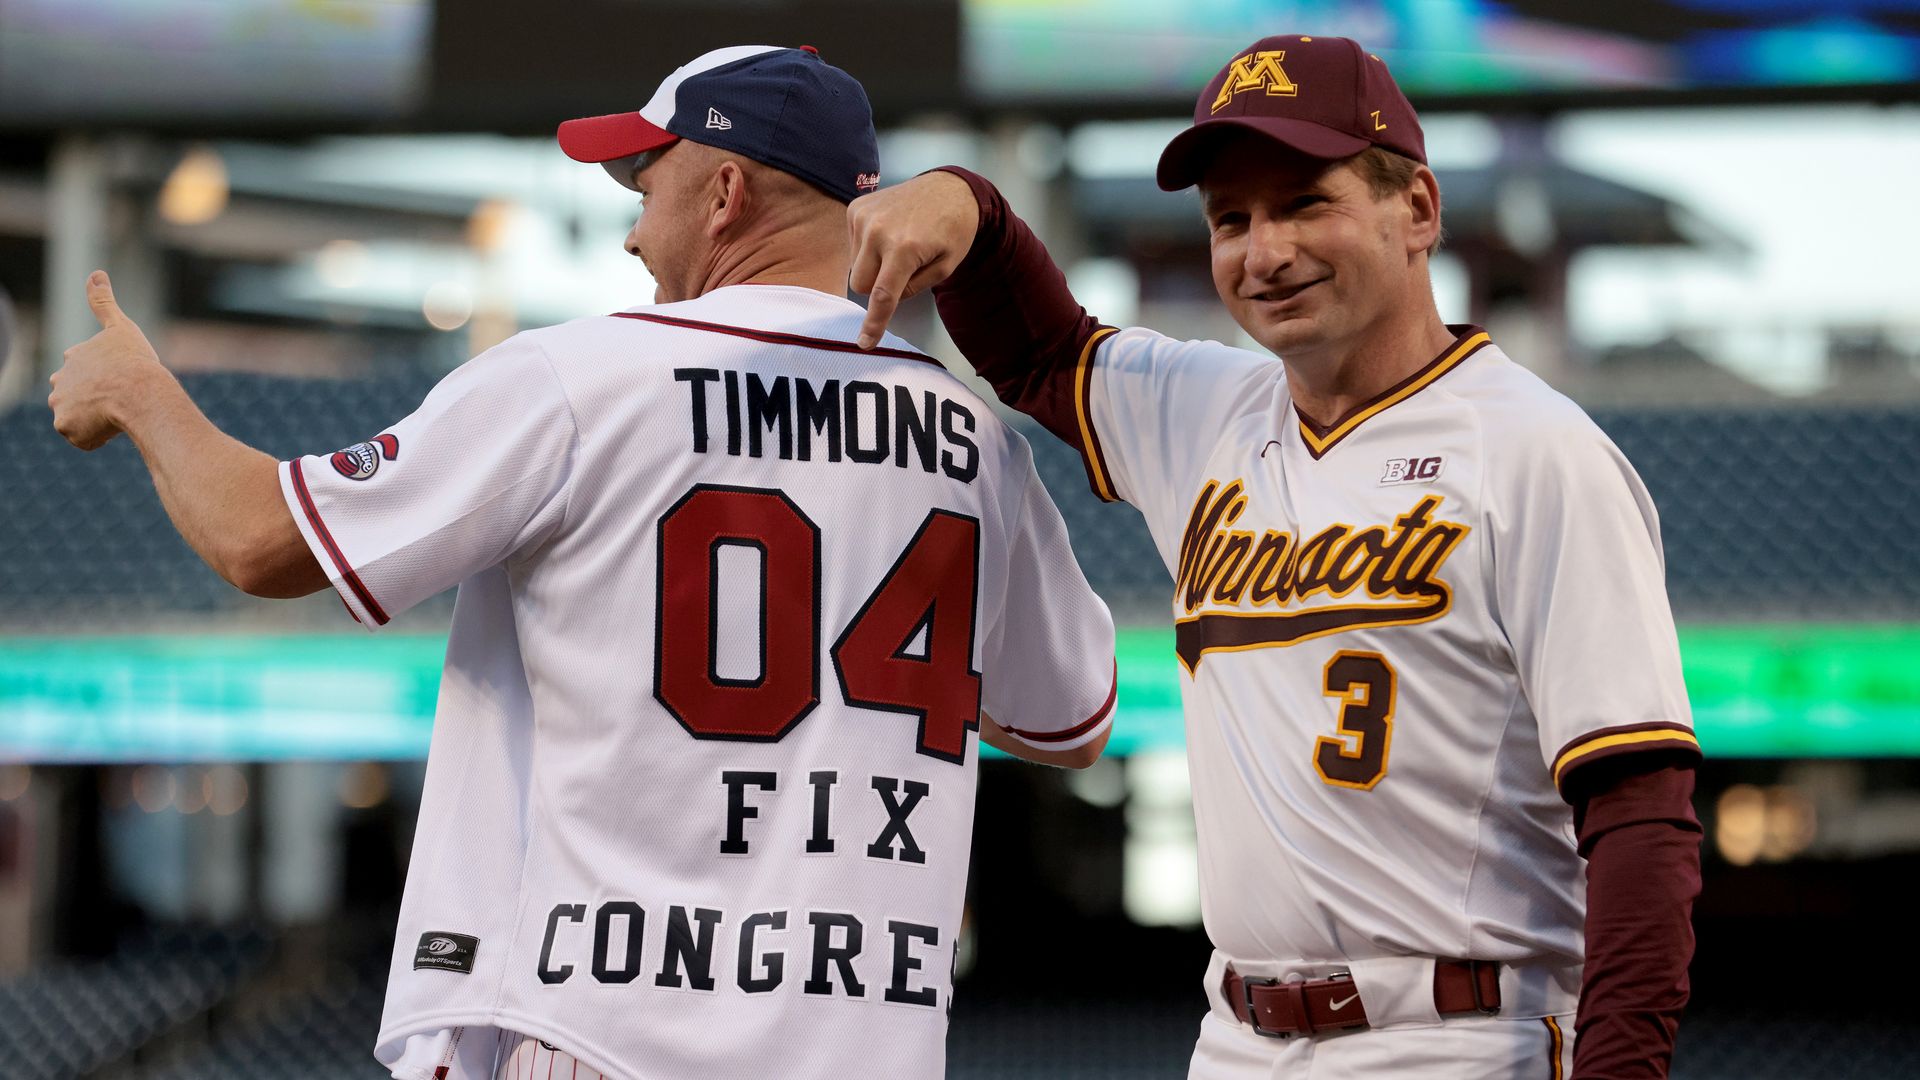 Two lawmakers are seen laughing during the annual congressional baseball game.